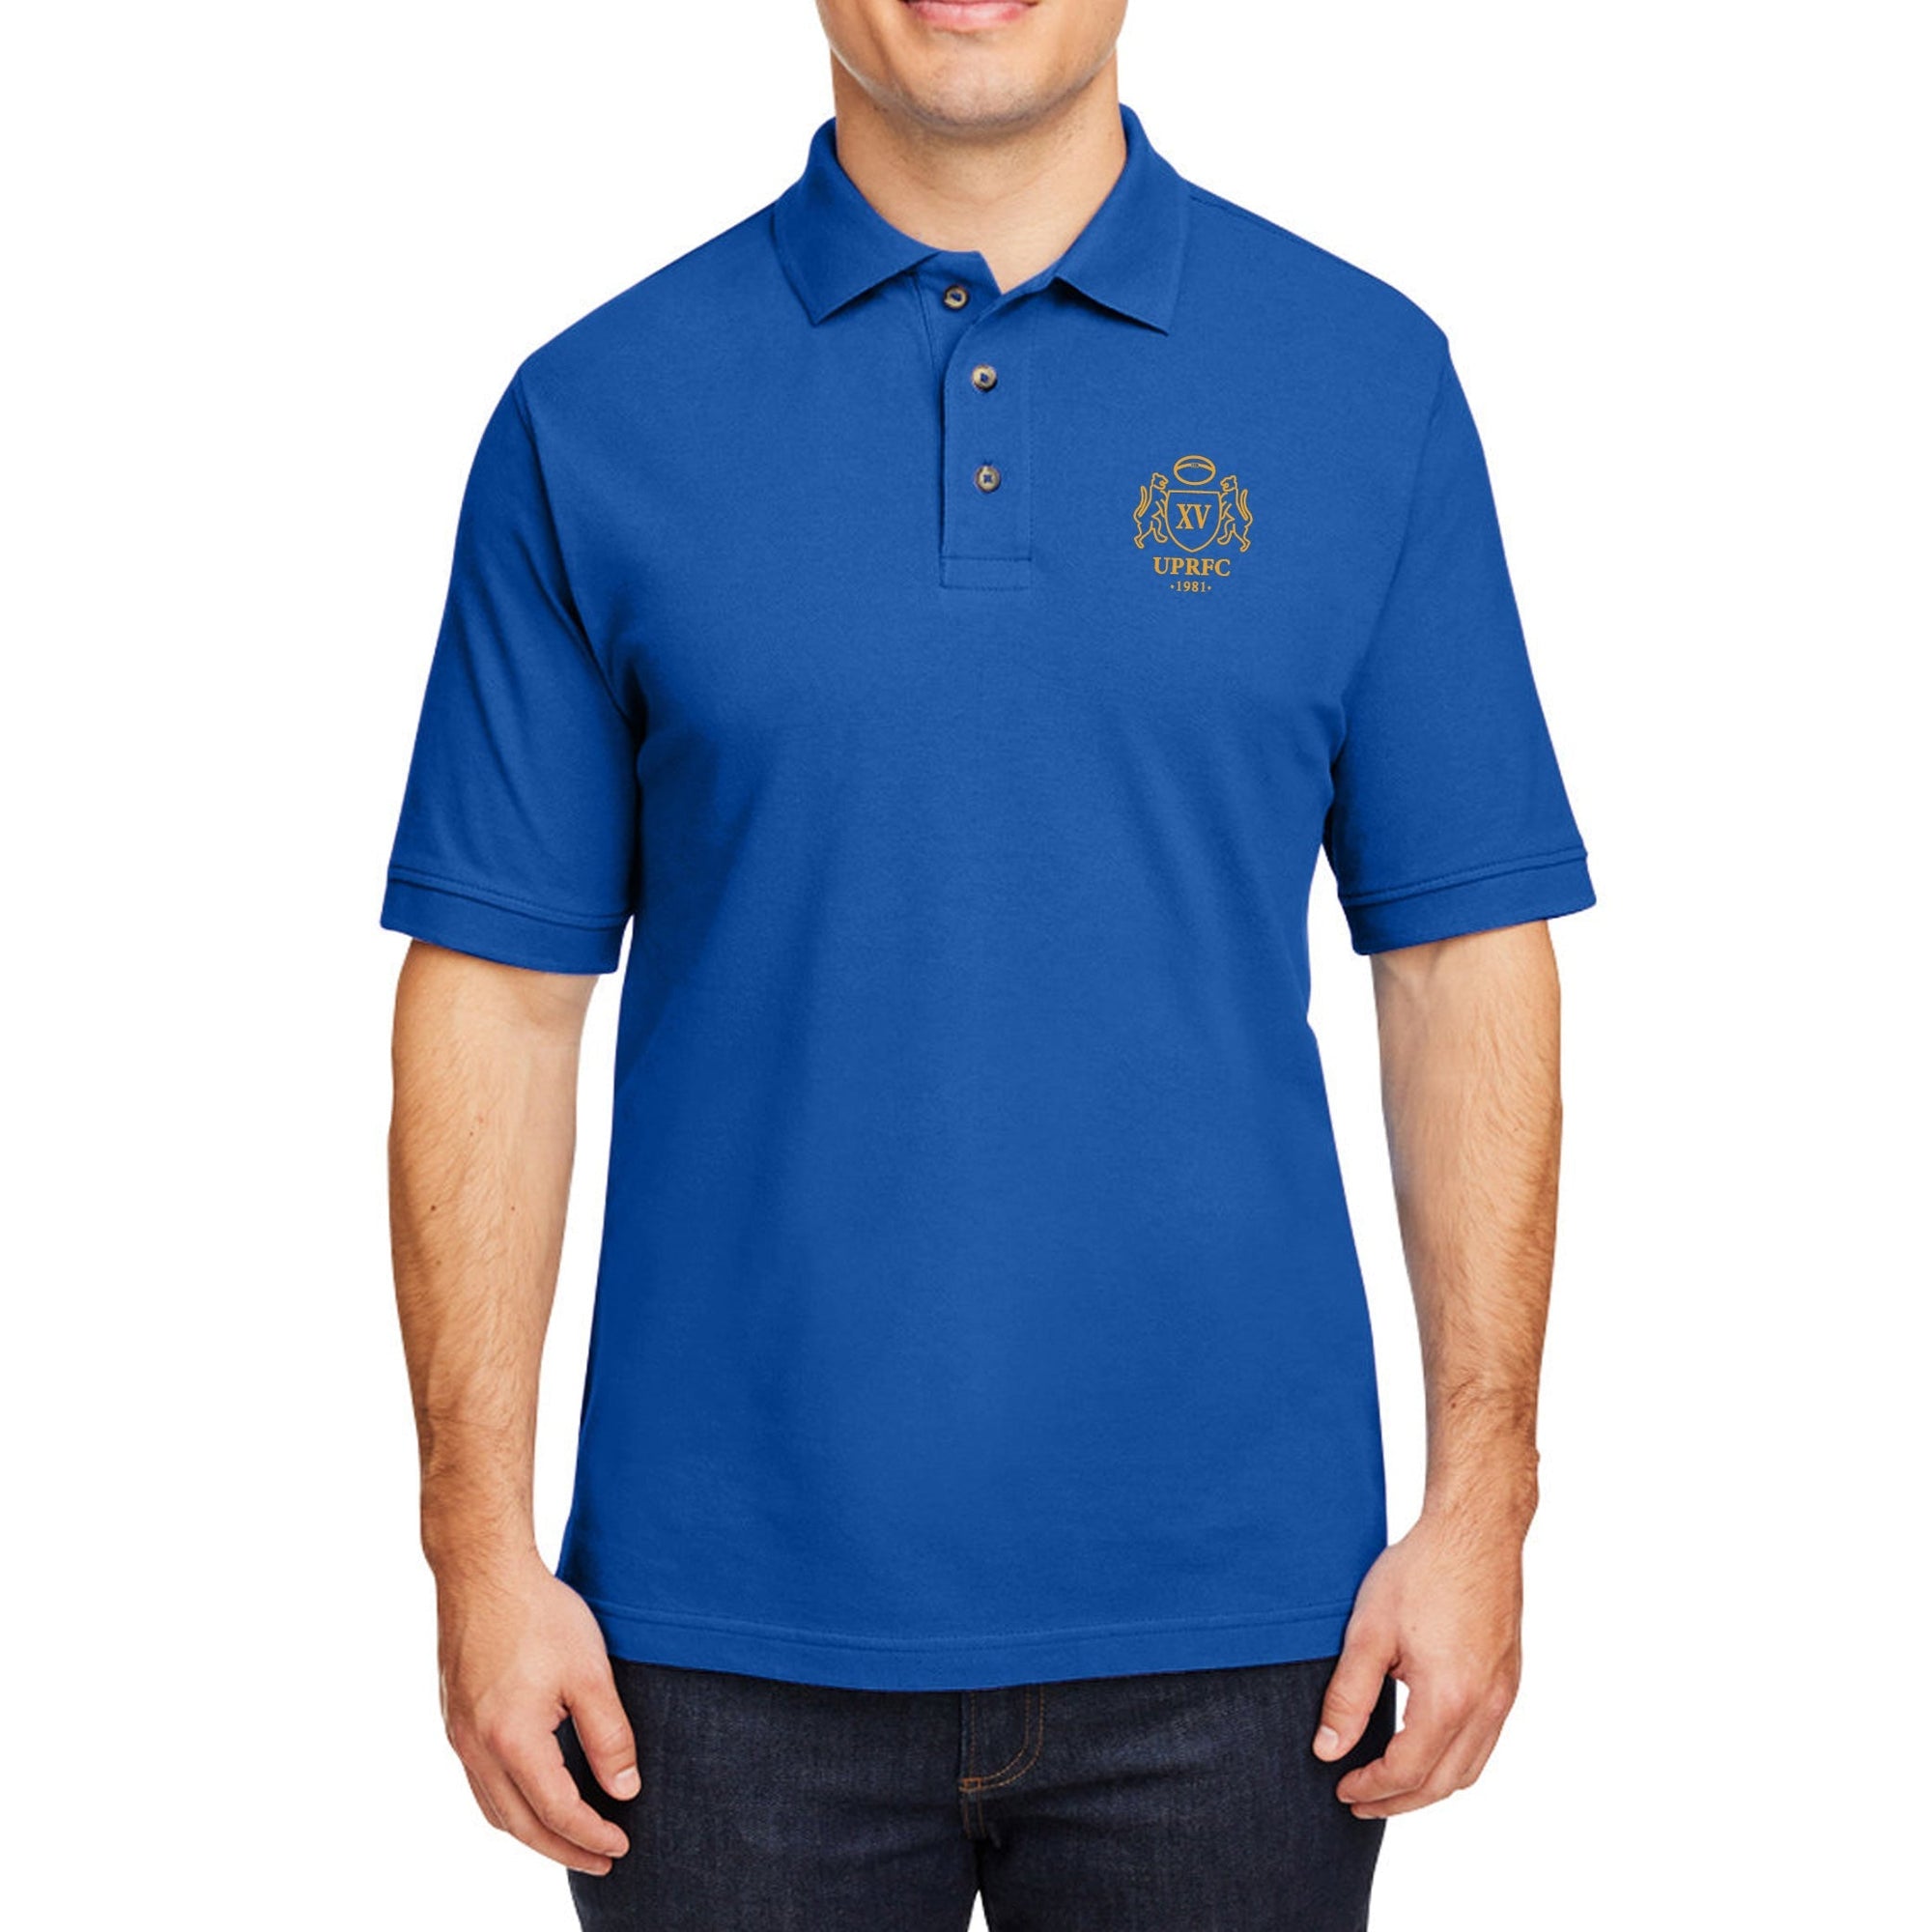 Rugby Imports UPitt RFC Ringspun Cotton Polo